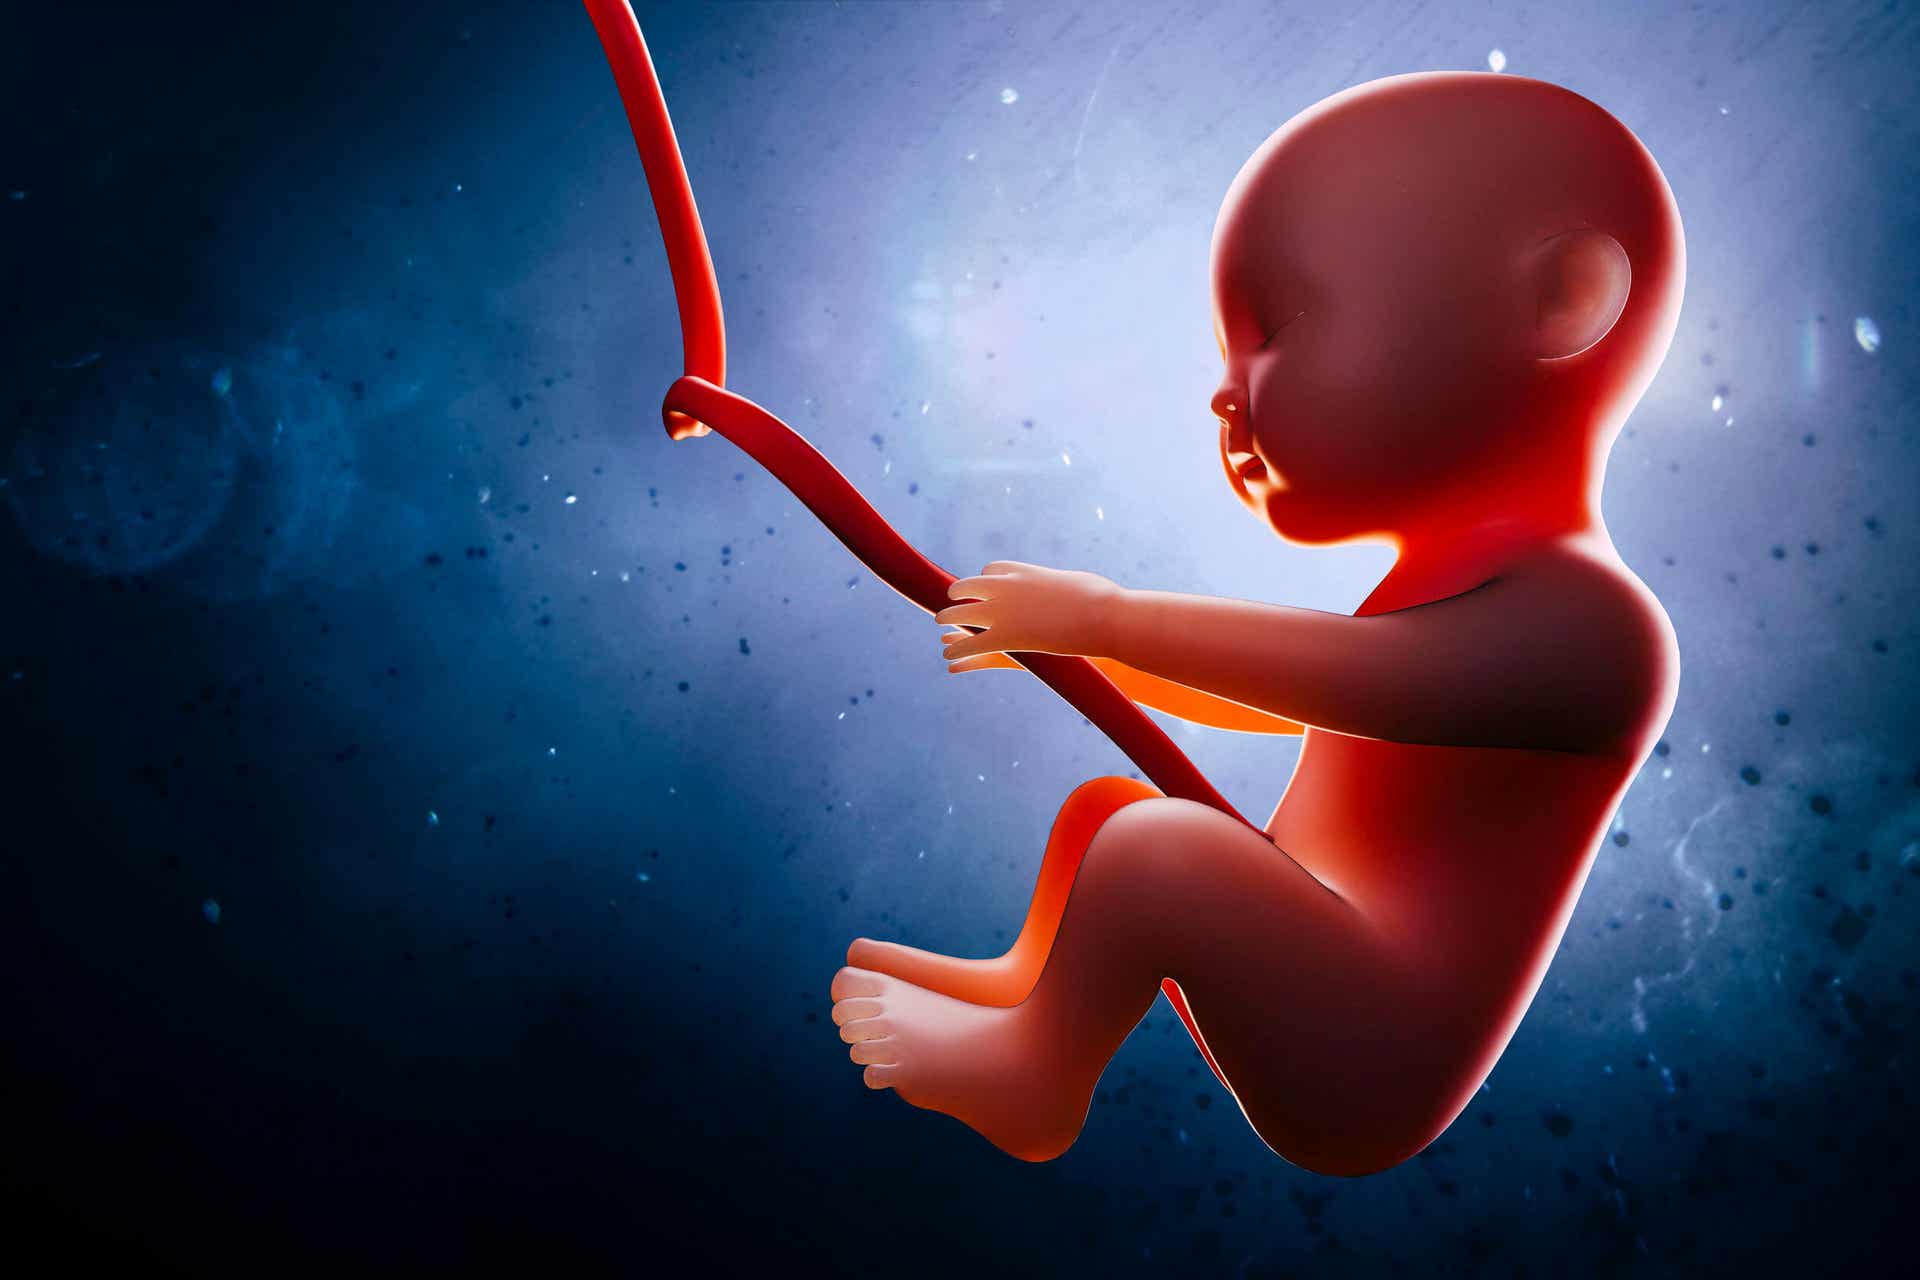 A digital illustration of a baby floating in the womb.